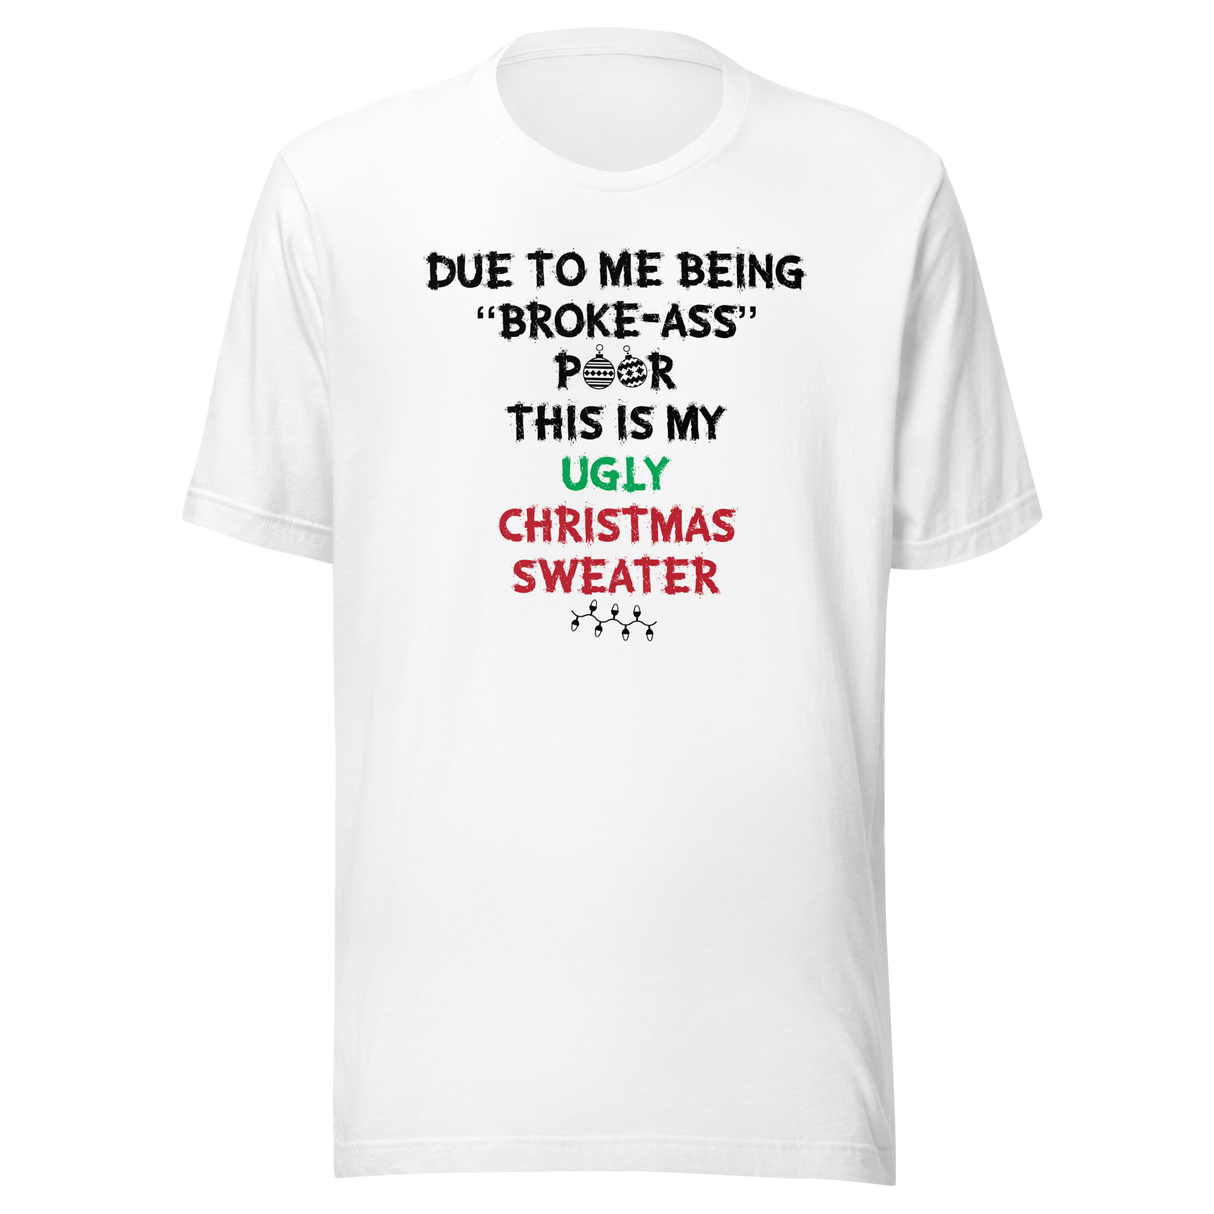 due-to-me-being-broke-ass-poor-this-is-my-christmas-sweater-holidays-tee-christmas-t-shirt-holidays-tee-humor-t-shirt-quirky-tee#color_white